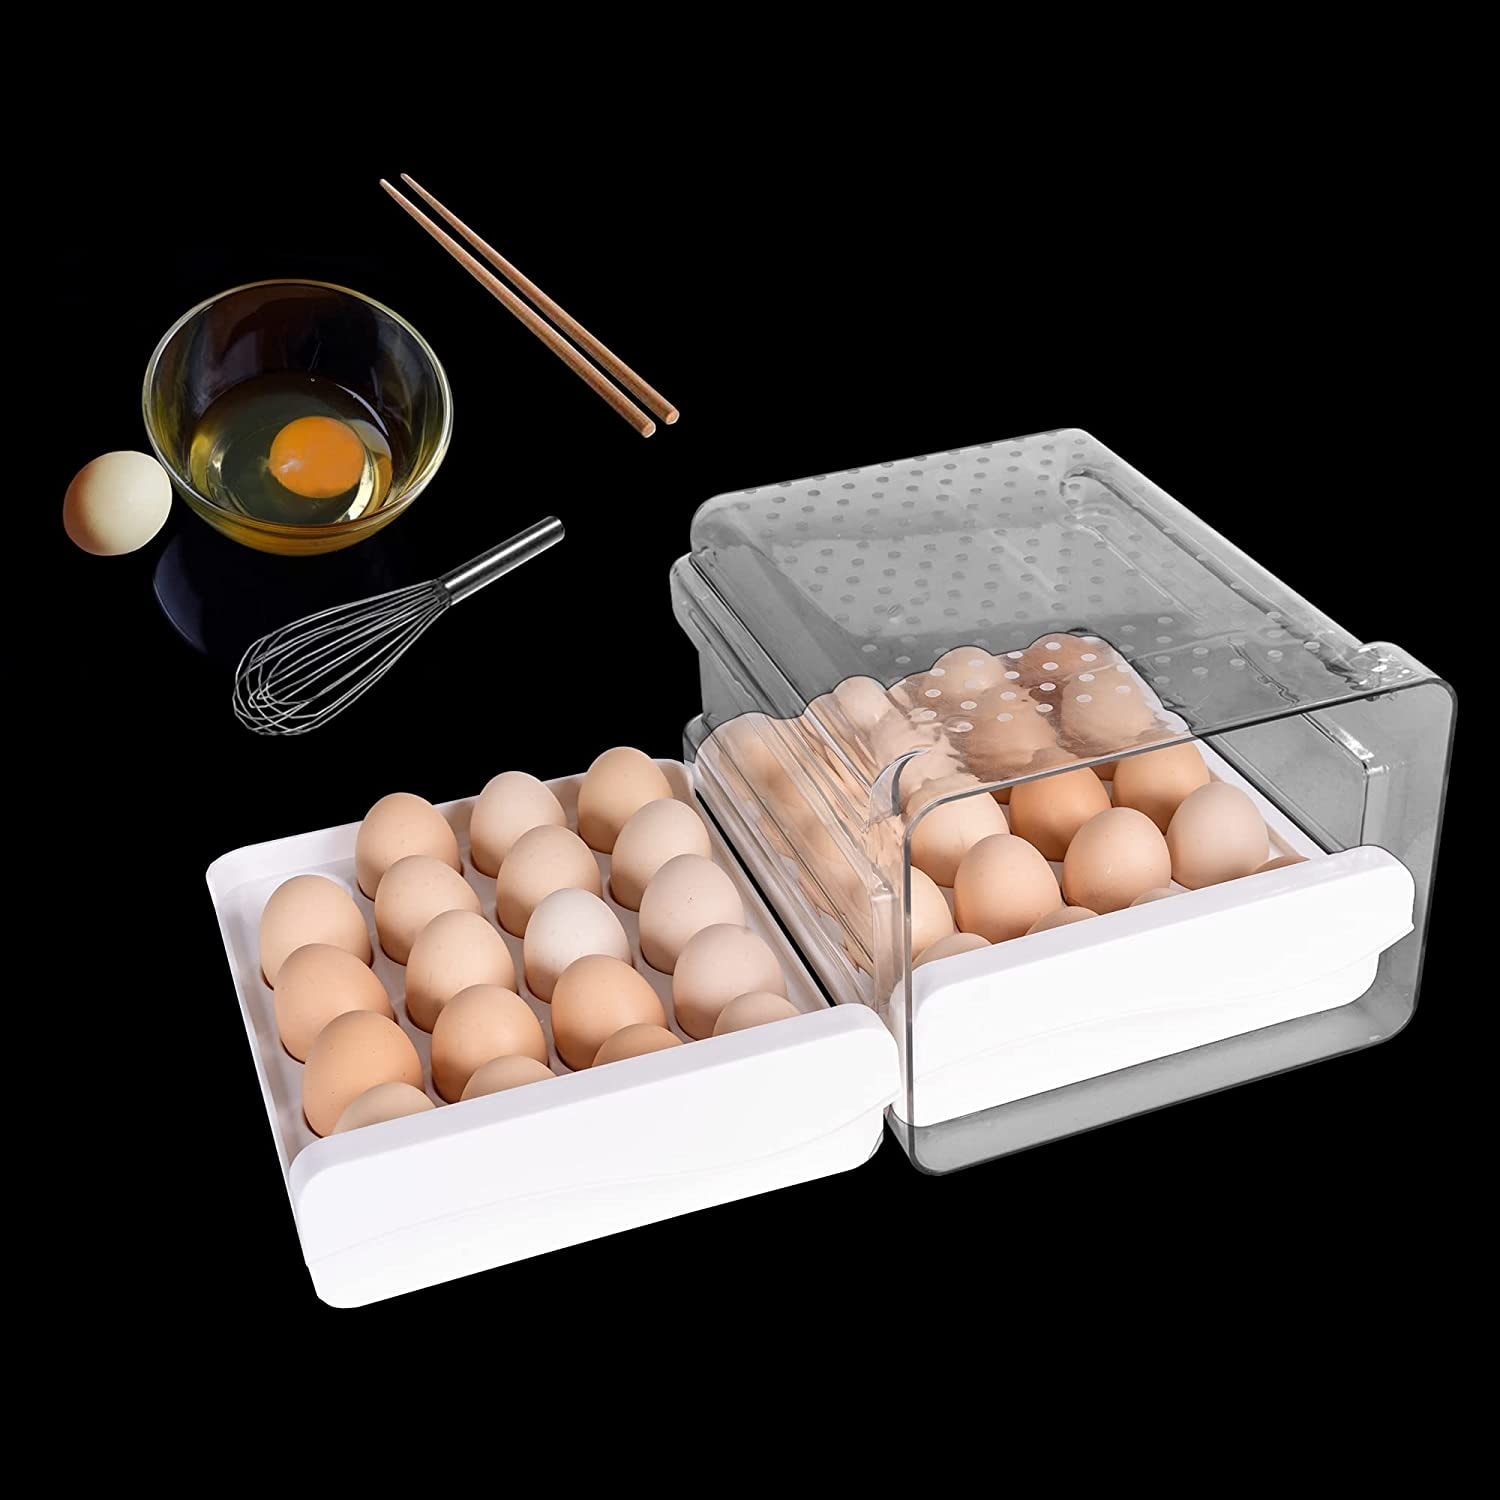 https://ak1.ostkcdn.com/images/products/is/images/direct/d43ce60998390ad7a6bb478e4b1b431c5c54f123/Kitchen-Plastic-Egg-Holder%2CFridge-2-tier-Organizer-Container-with-Handles.jpg